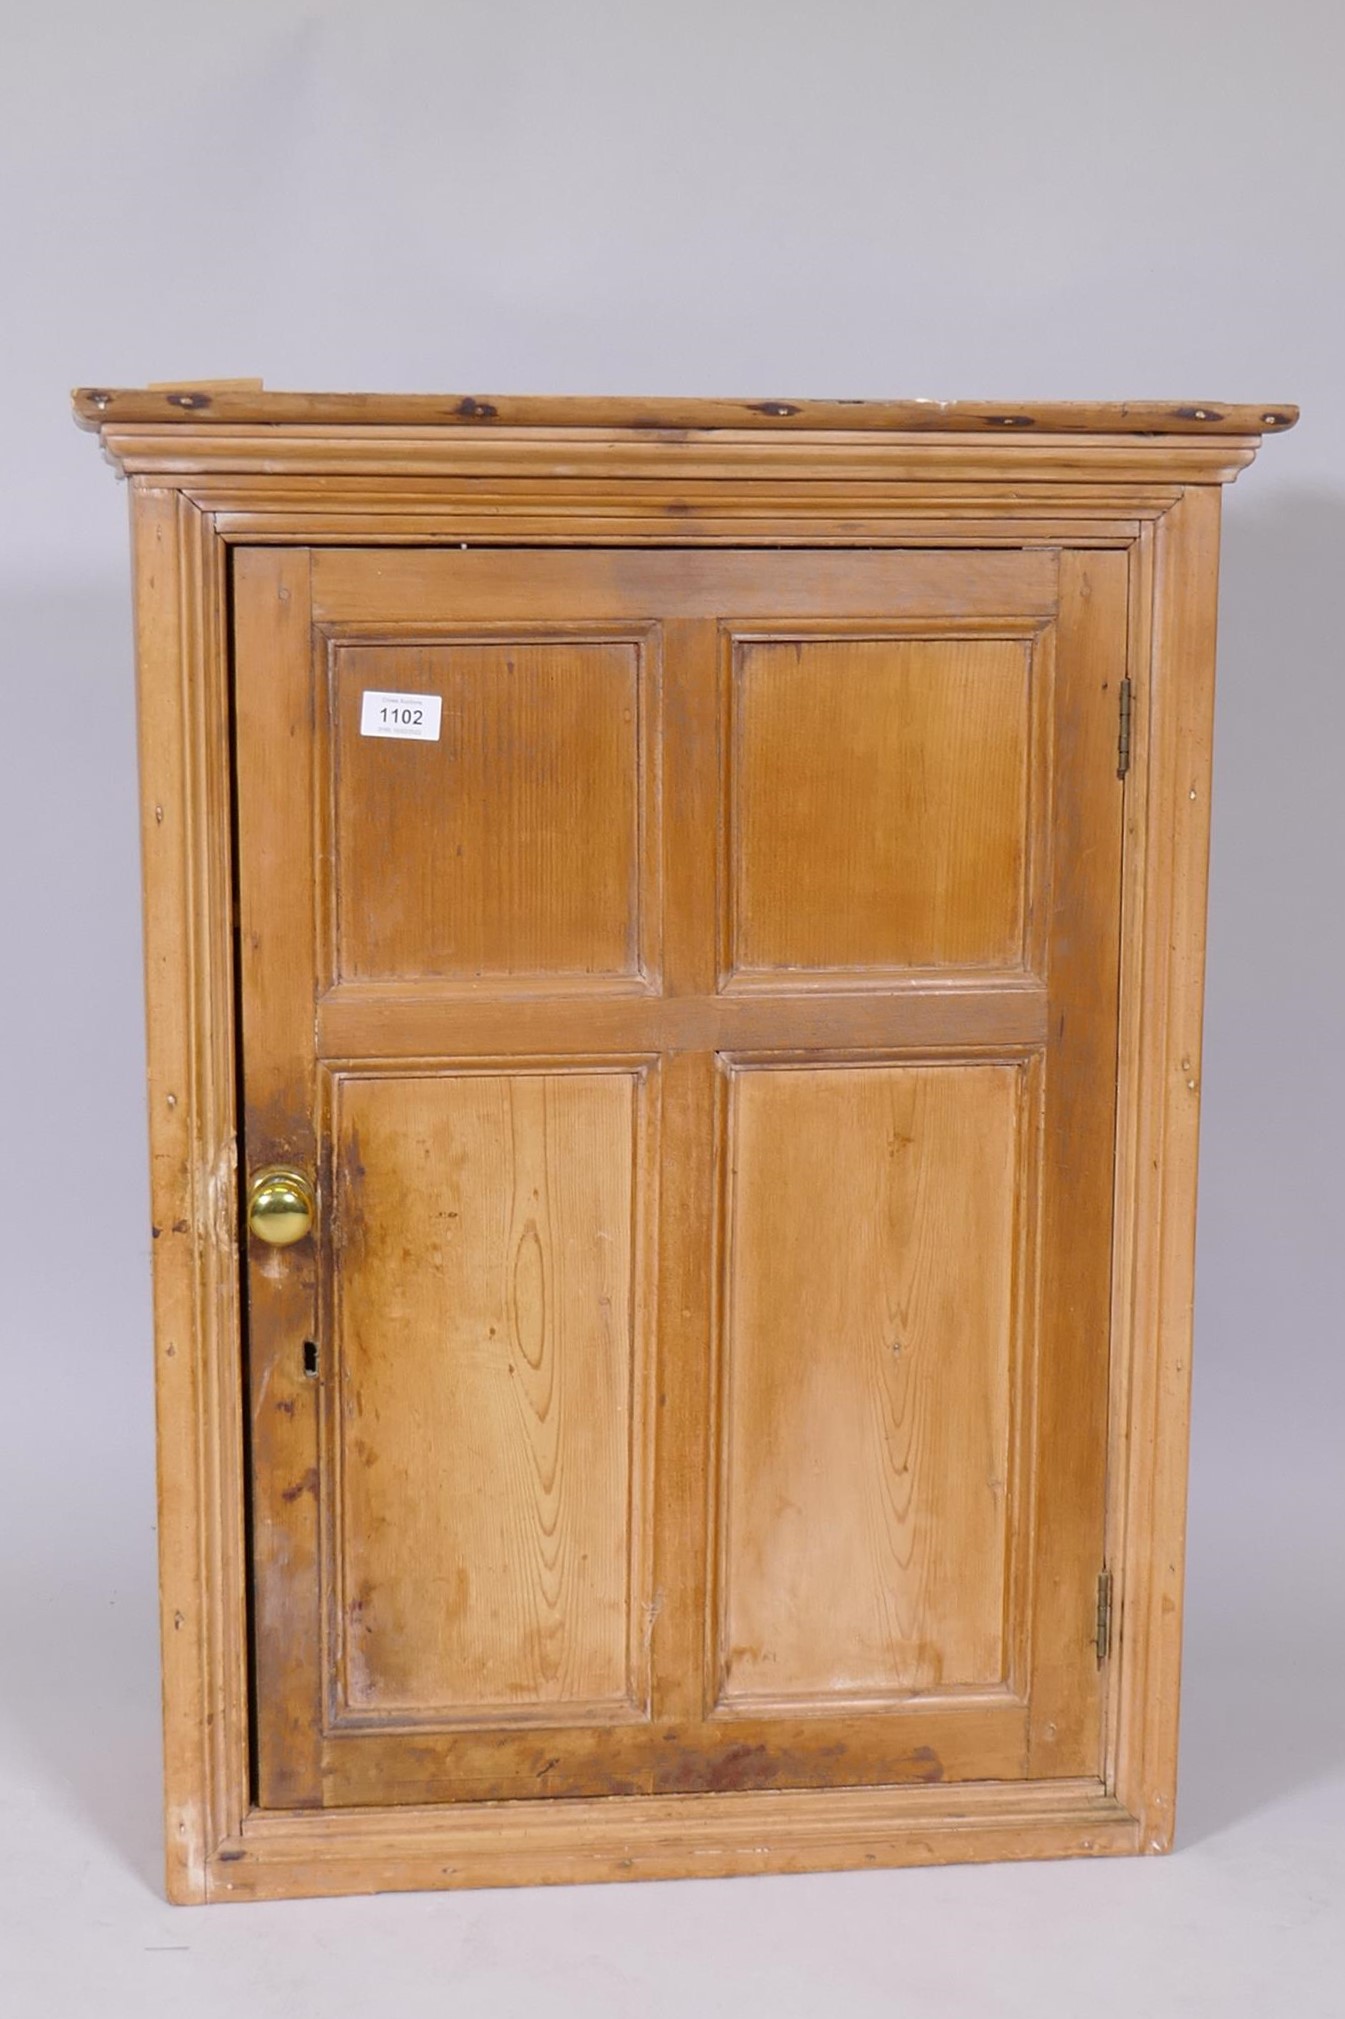 A C19th pine hanging food cupboard with panelled door and two shelves, 24" x 12" x 30"